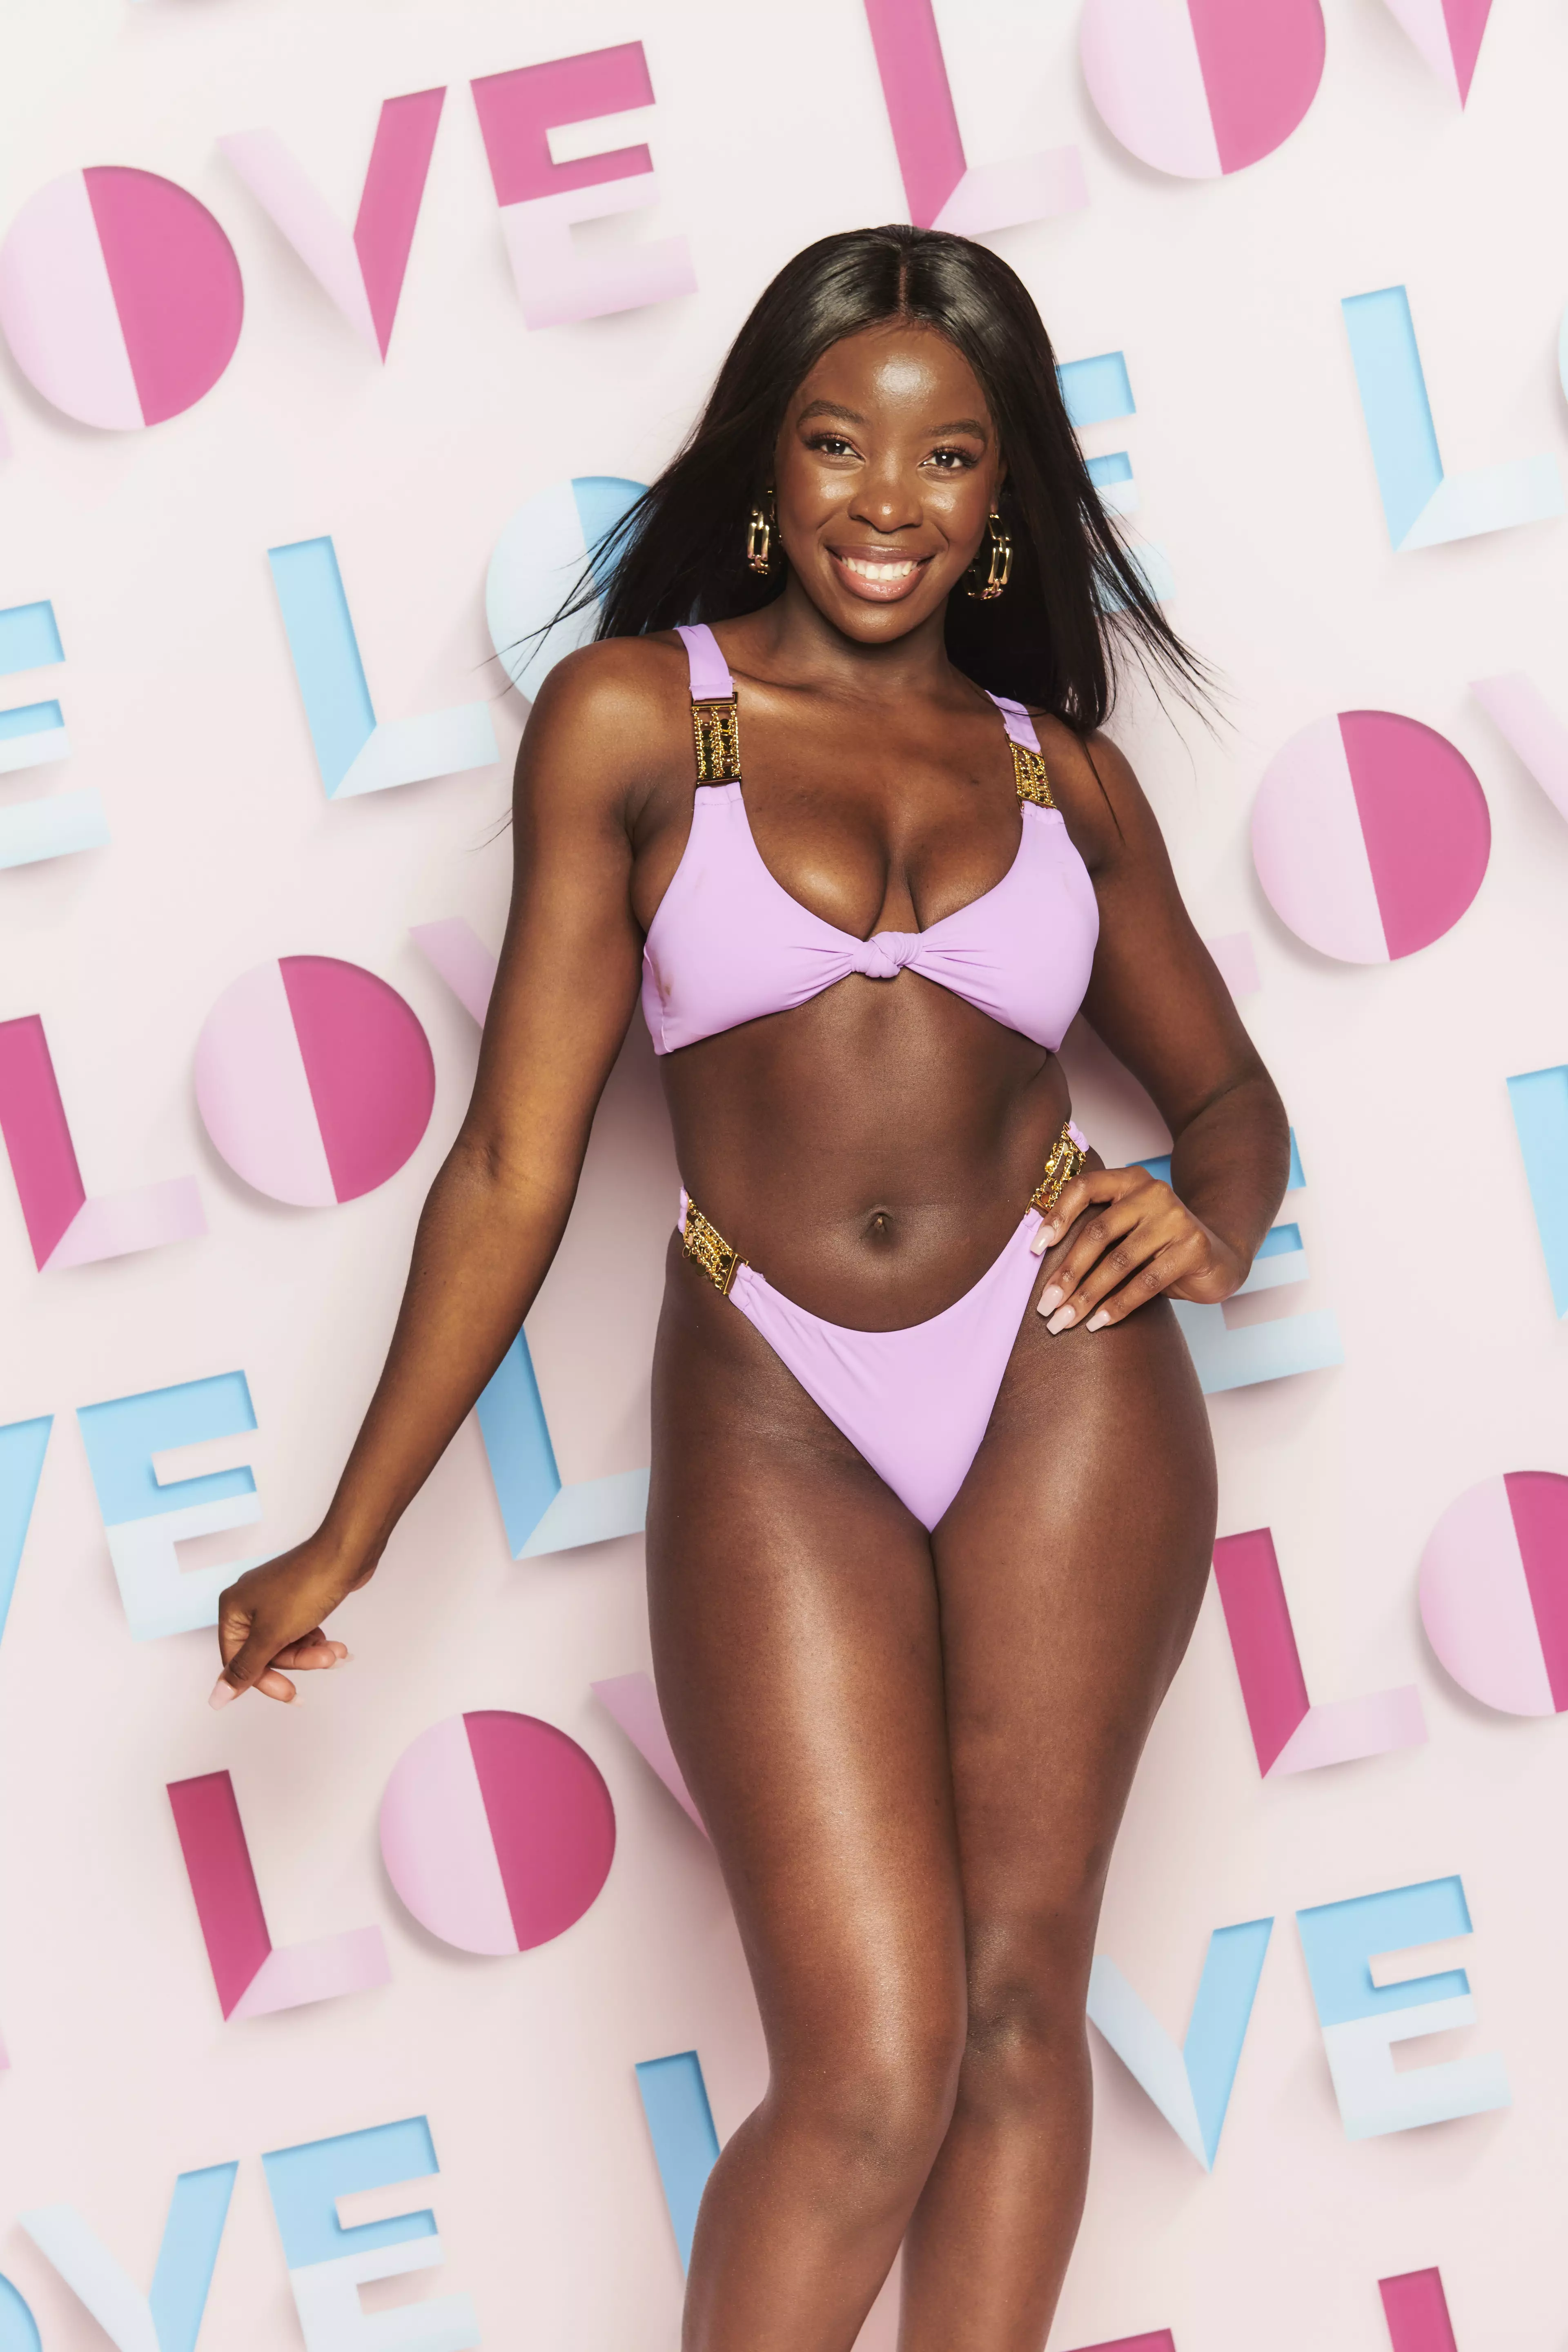 Kaz Kamwi. Love Island starts at 9pm Monday 28th June on ITV2 and ITV Hub. Episodes are available the following morning on BritBox (